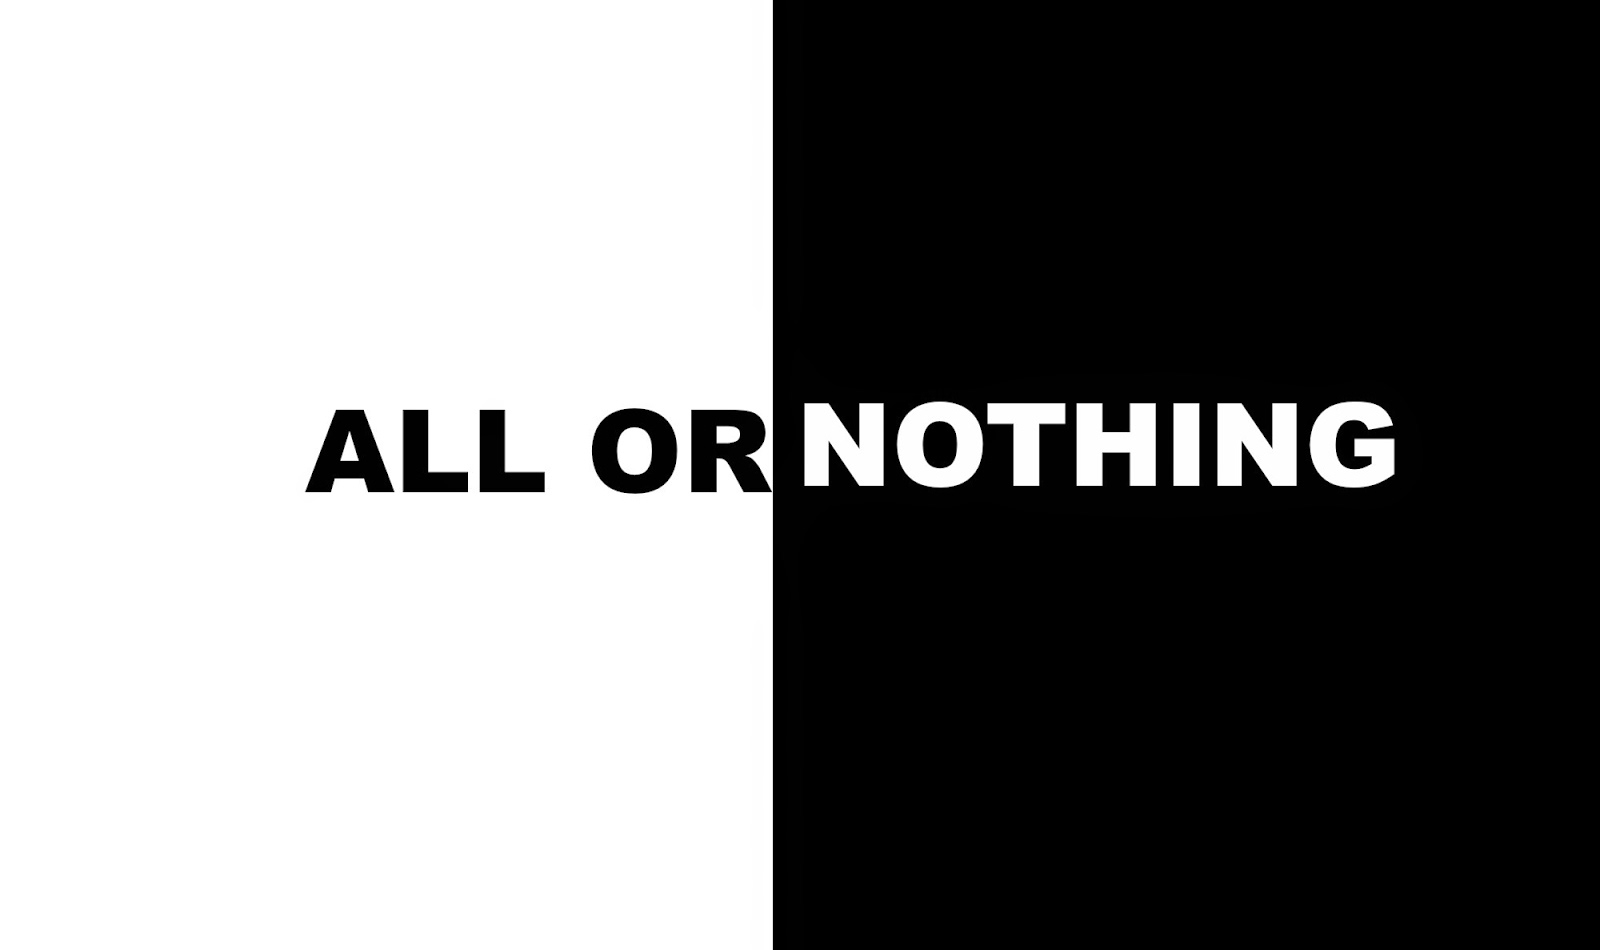 Нафинг фон 2 а. All or nothing. Обои nothing. Nothing фирма. Nothing картинка.